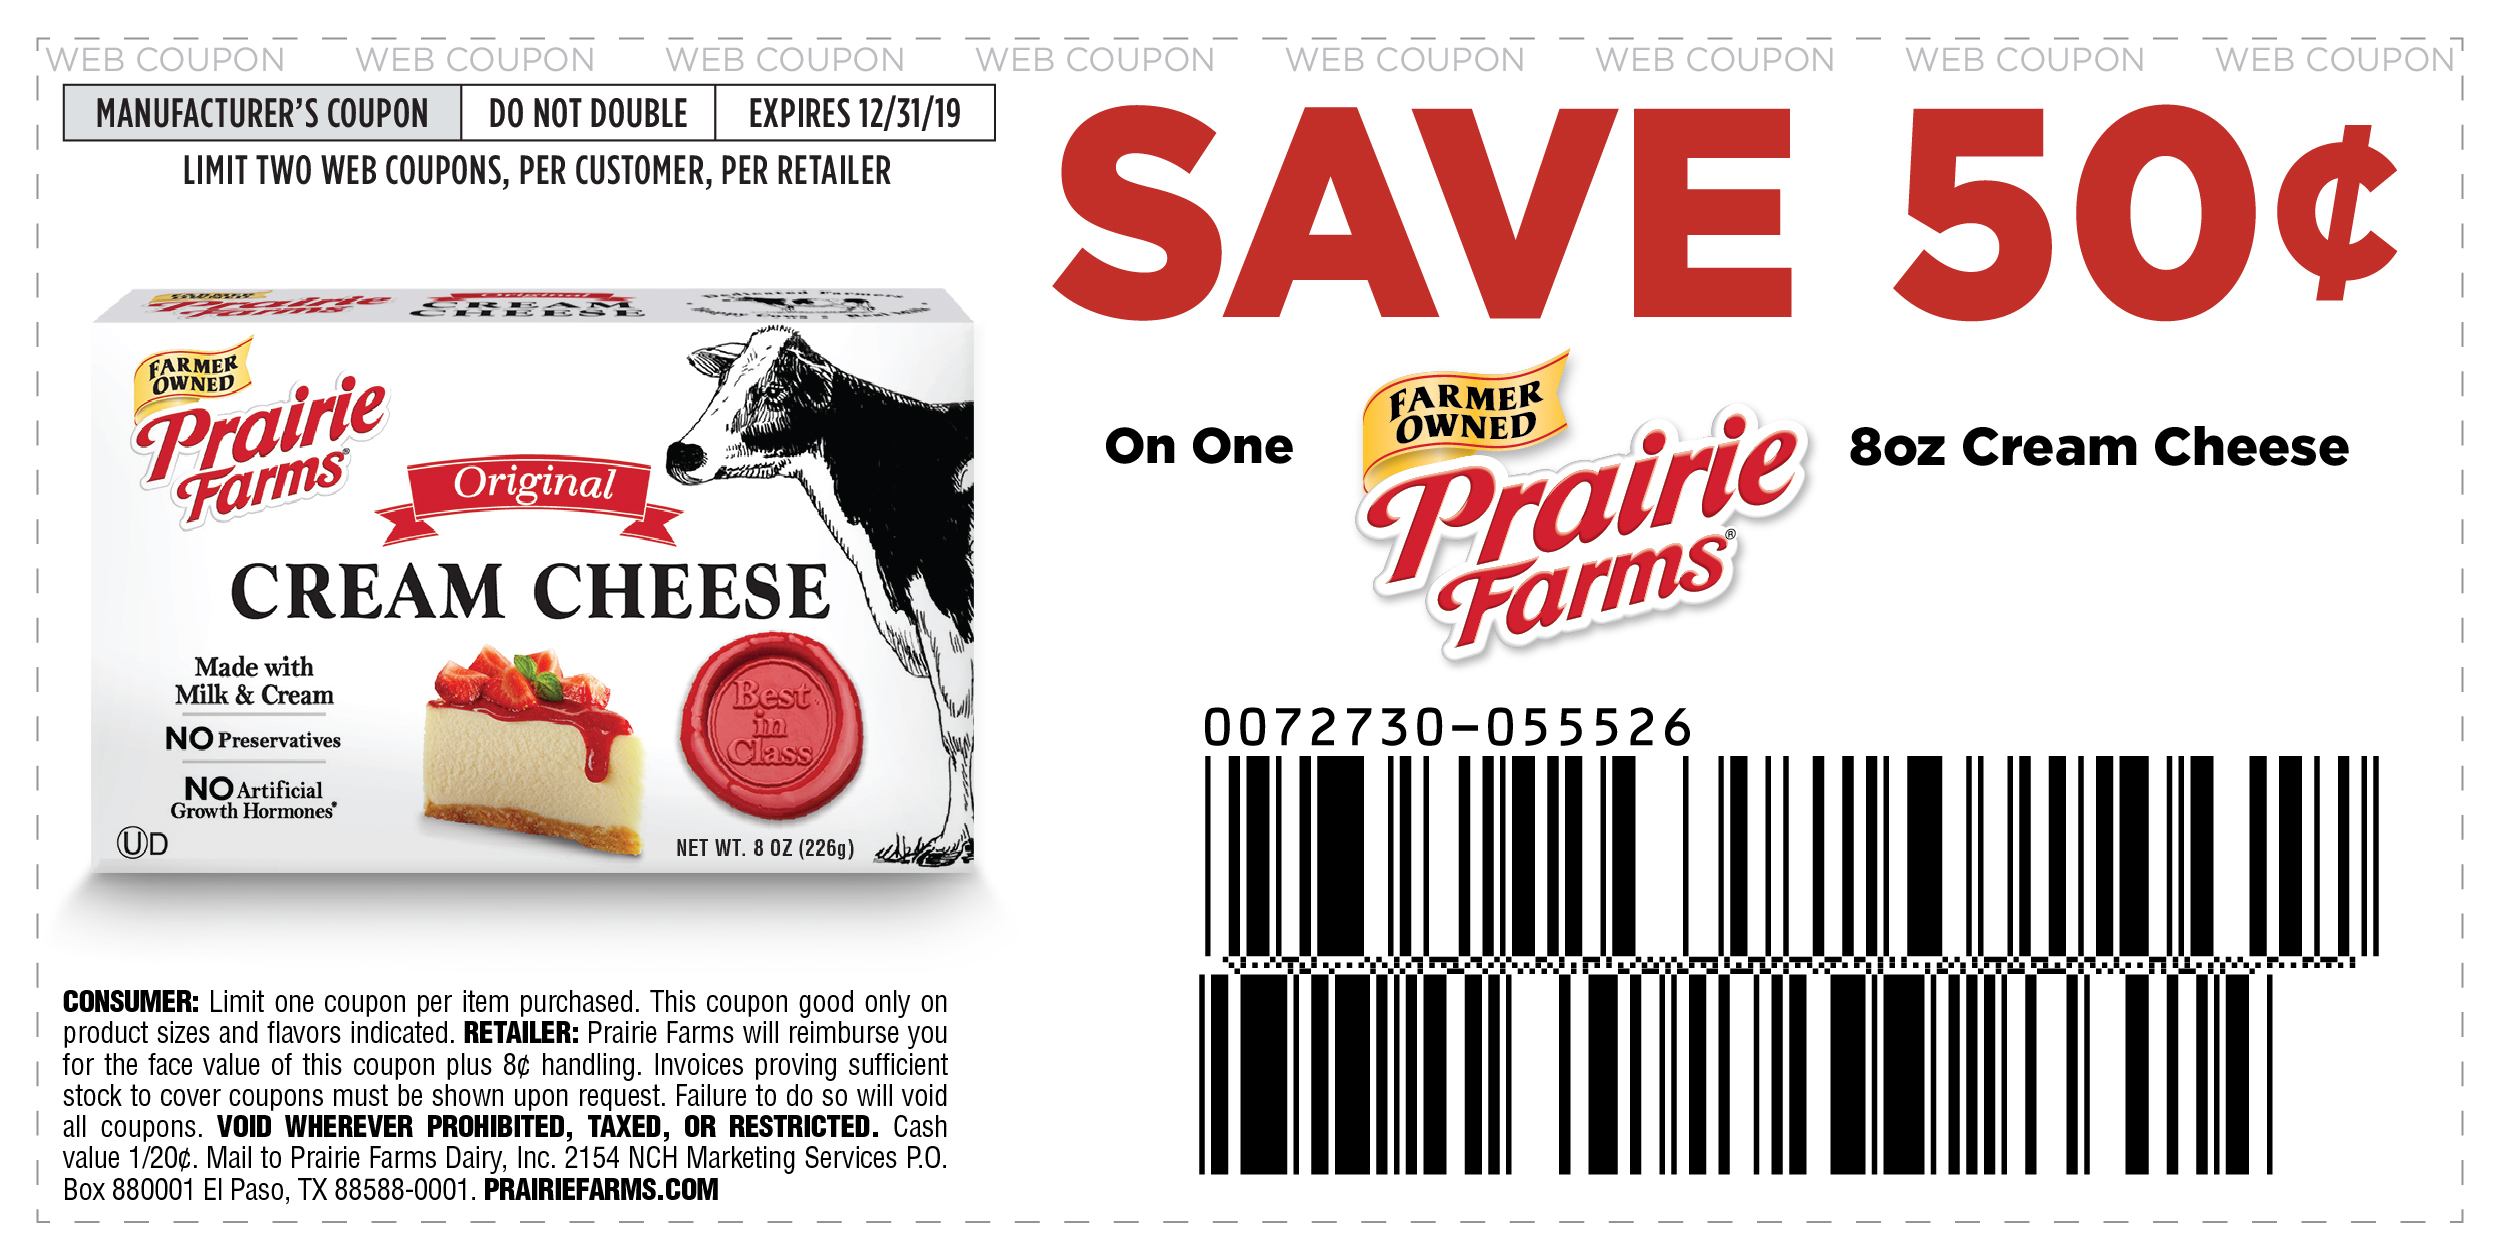 Prairie Farms Coupons, Save Now, Ice Cream, Cottage Cheese - Free Milk Coupons Printable